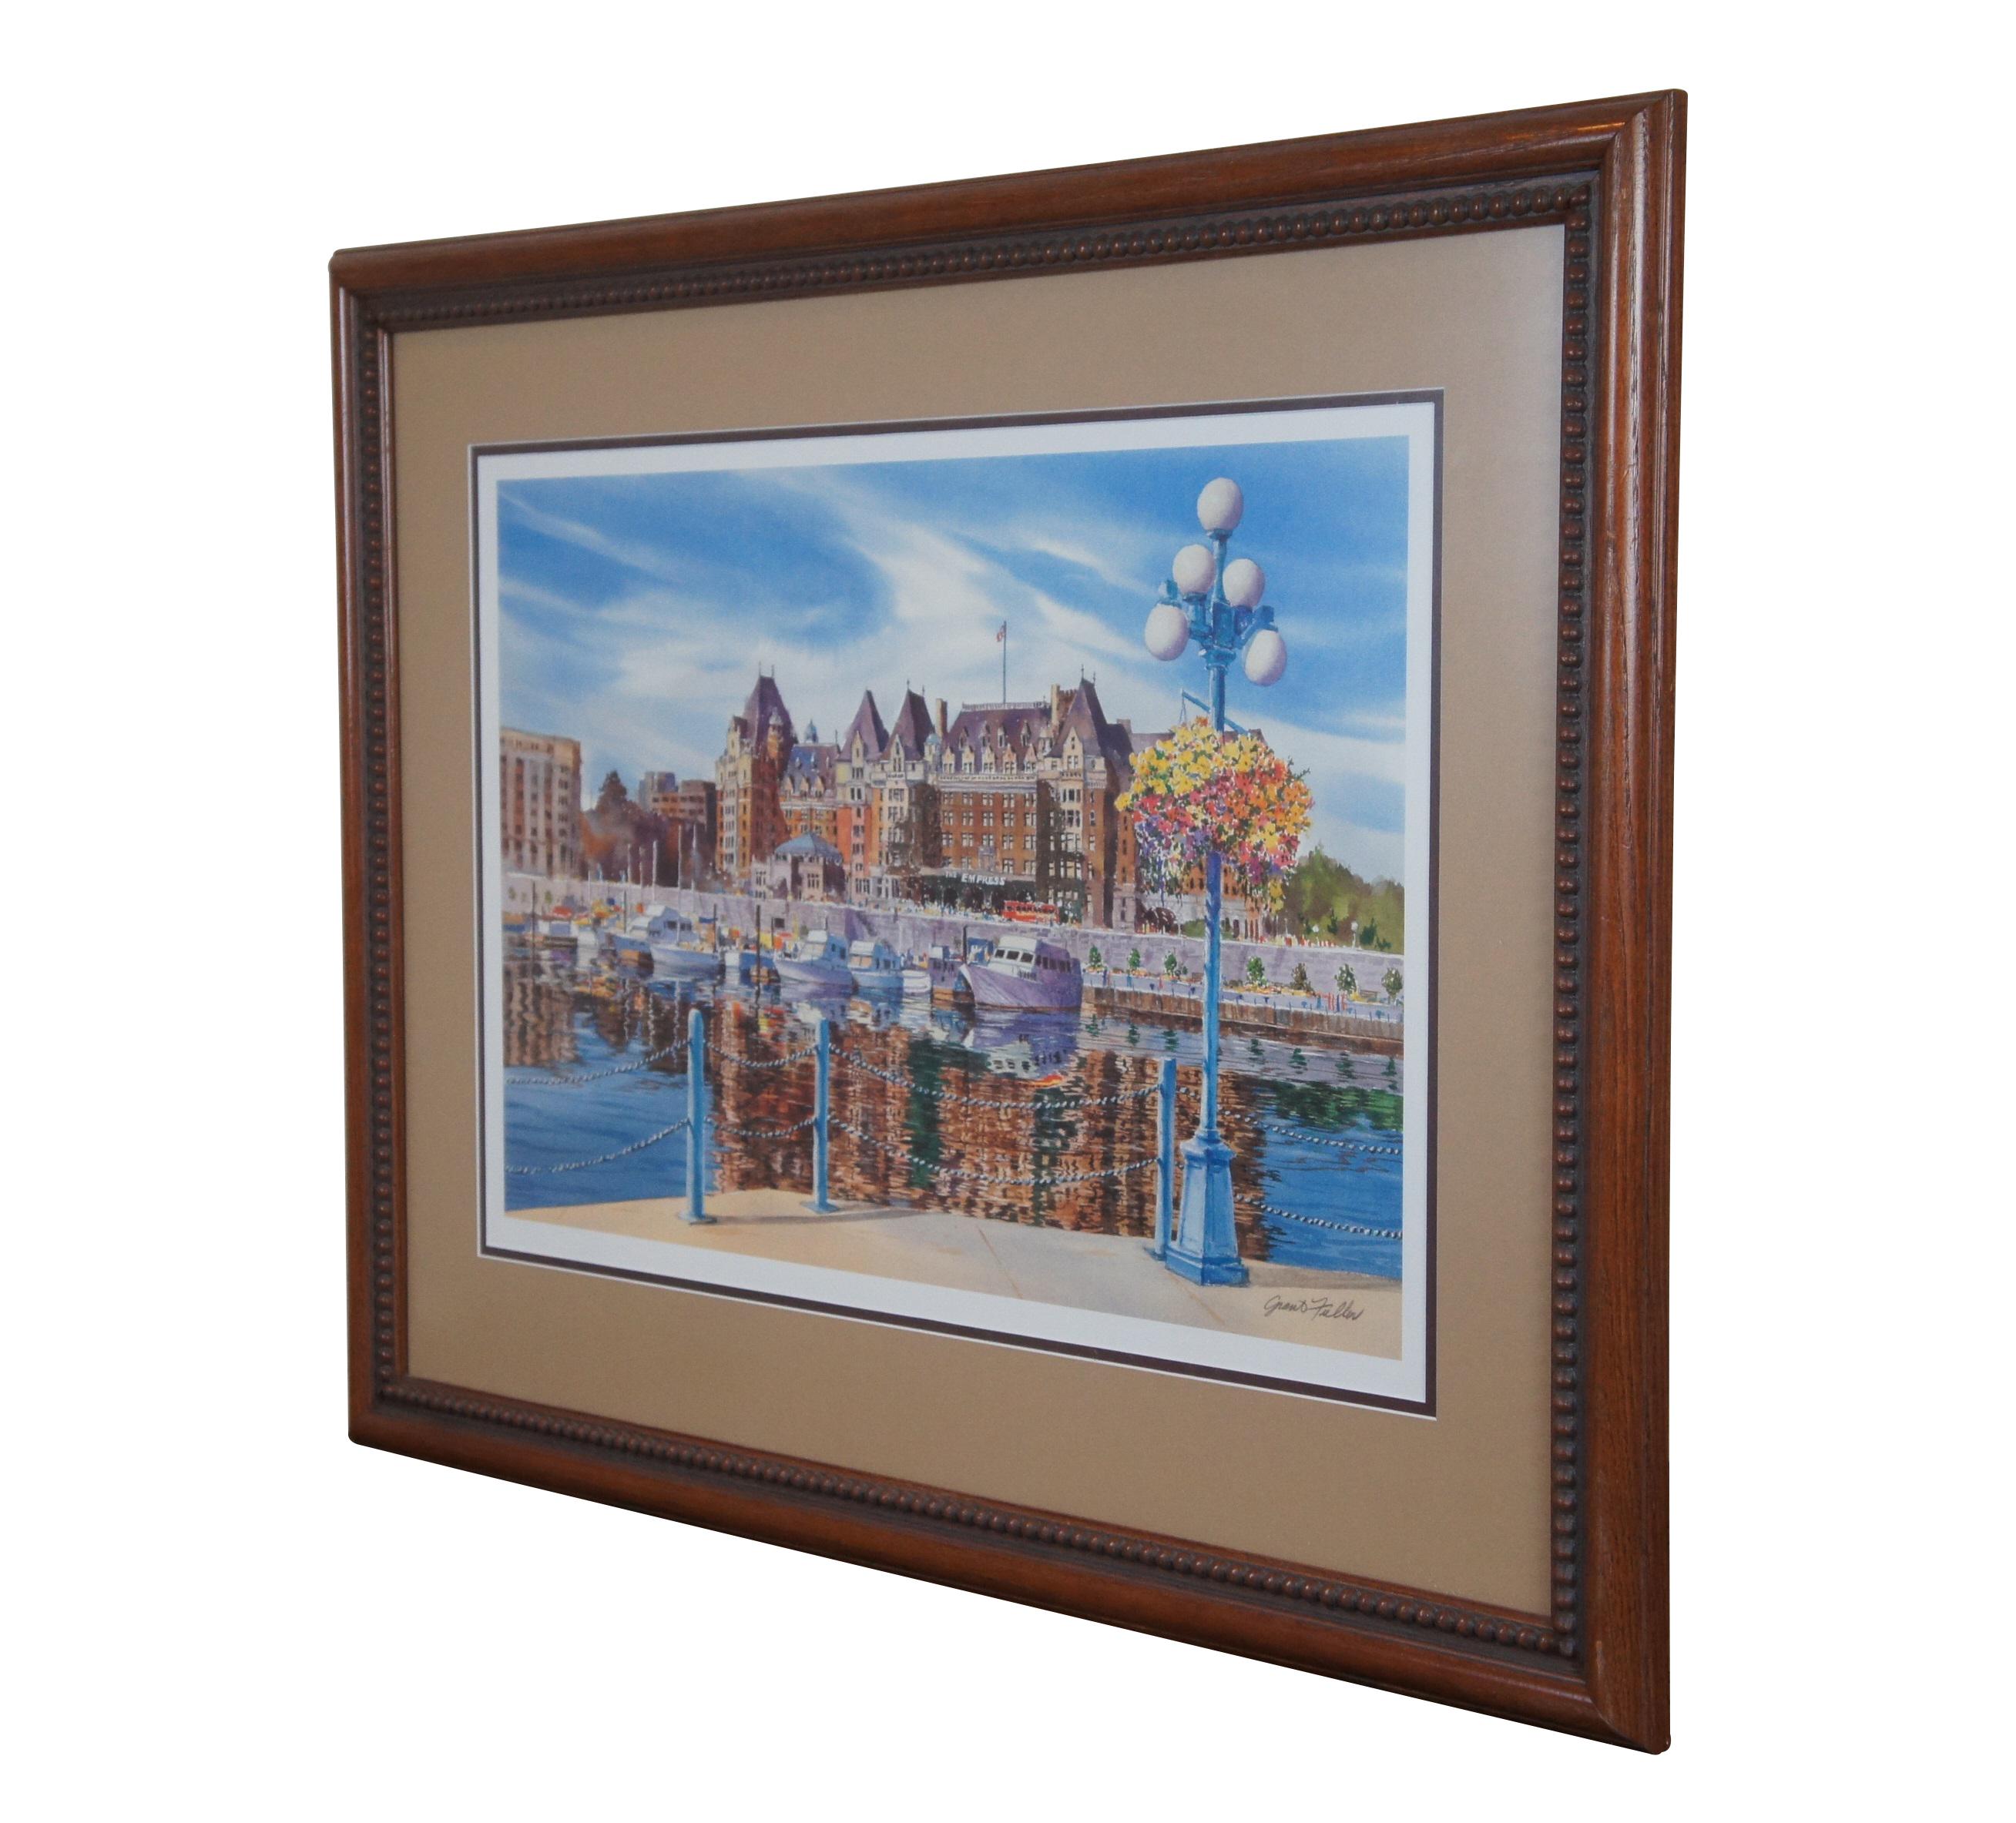 Vintage print by Grant Fuller, showing a view of The Empress Hotel of Victoria, British Columbia, Canada. Signed in plate. Light and dark brown layered mat; rounded wood frame with carved beaded detail.

